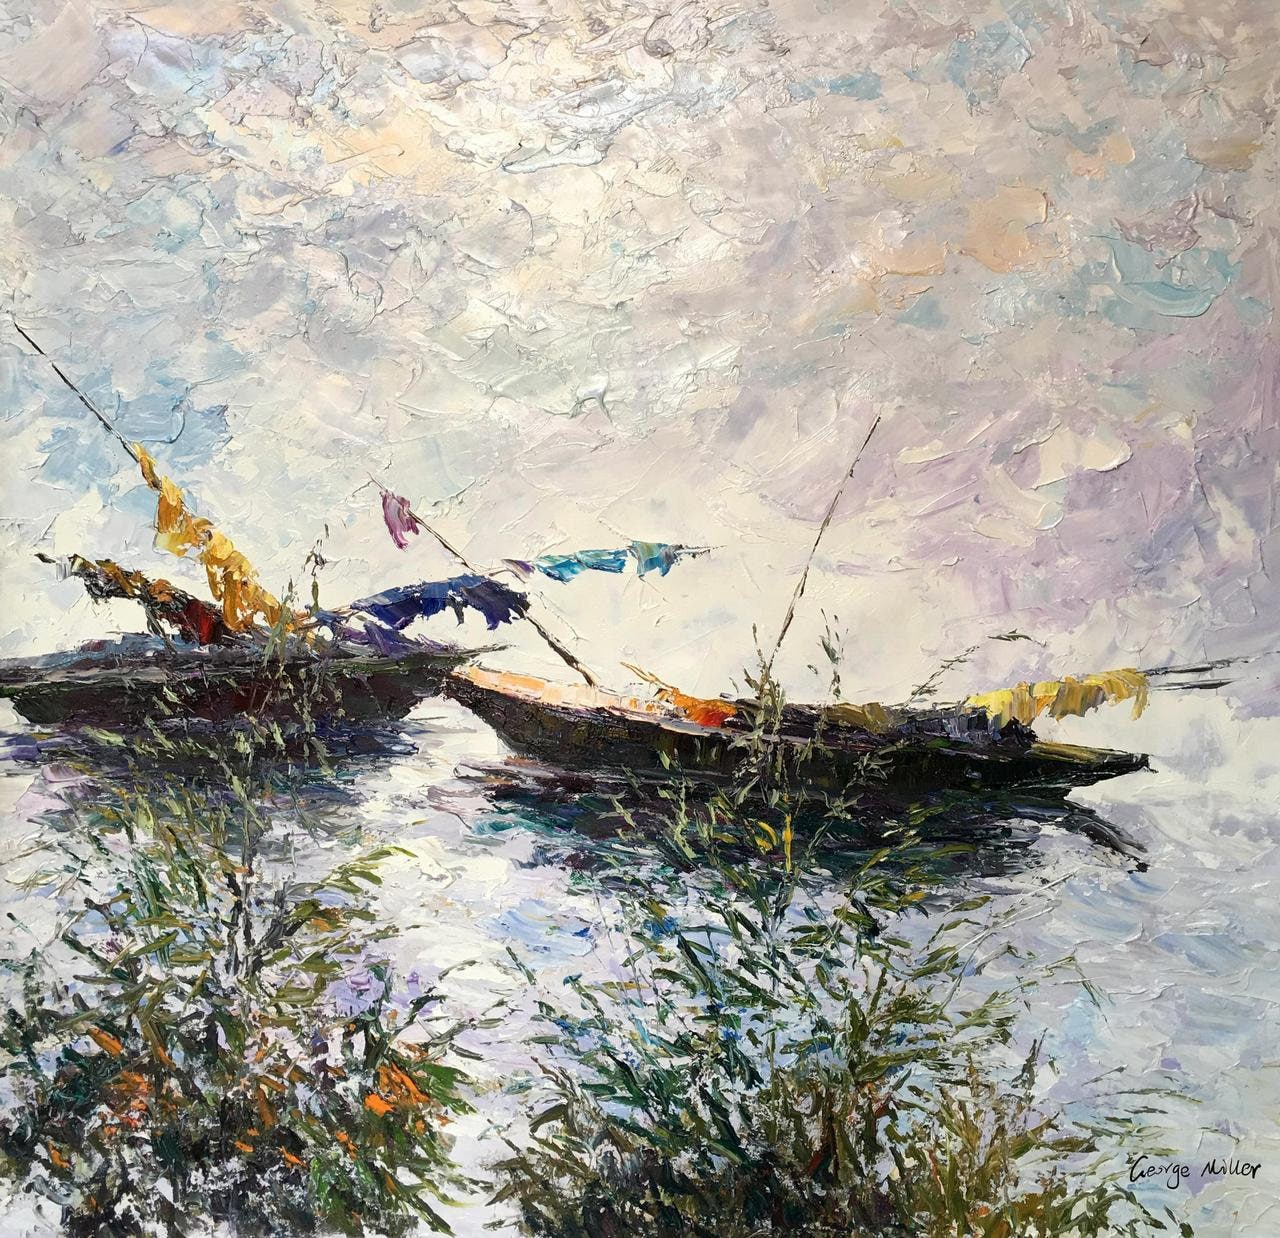 Oil Painting, Fishing Boat at Dawn, Contemporary Painting, Rustic Wall Decor, Large Wall Art Canvas, Landscape Oil Painting, Large Art